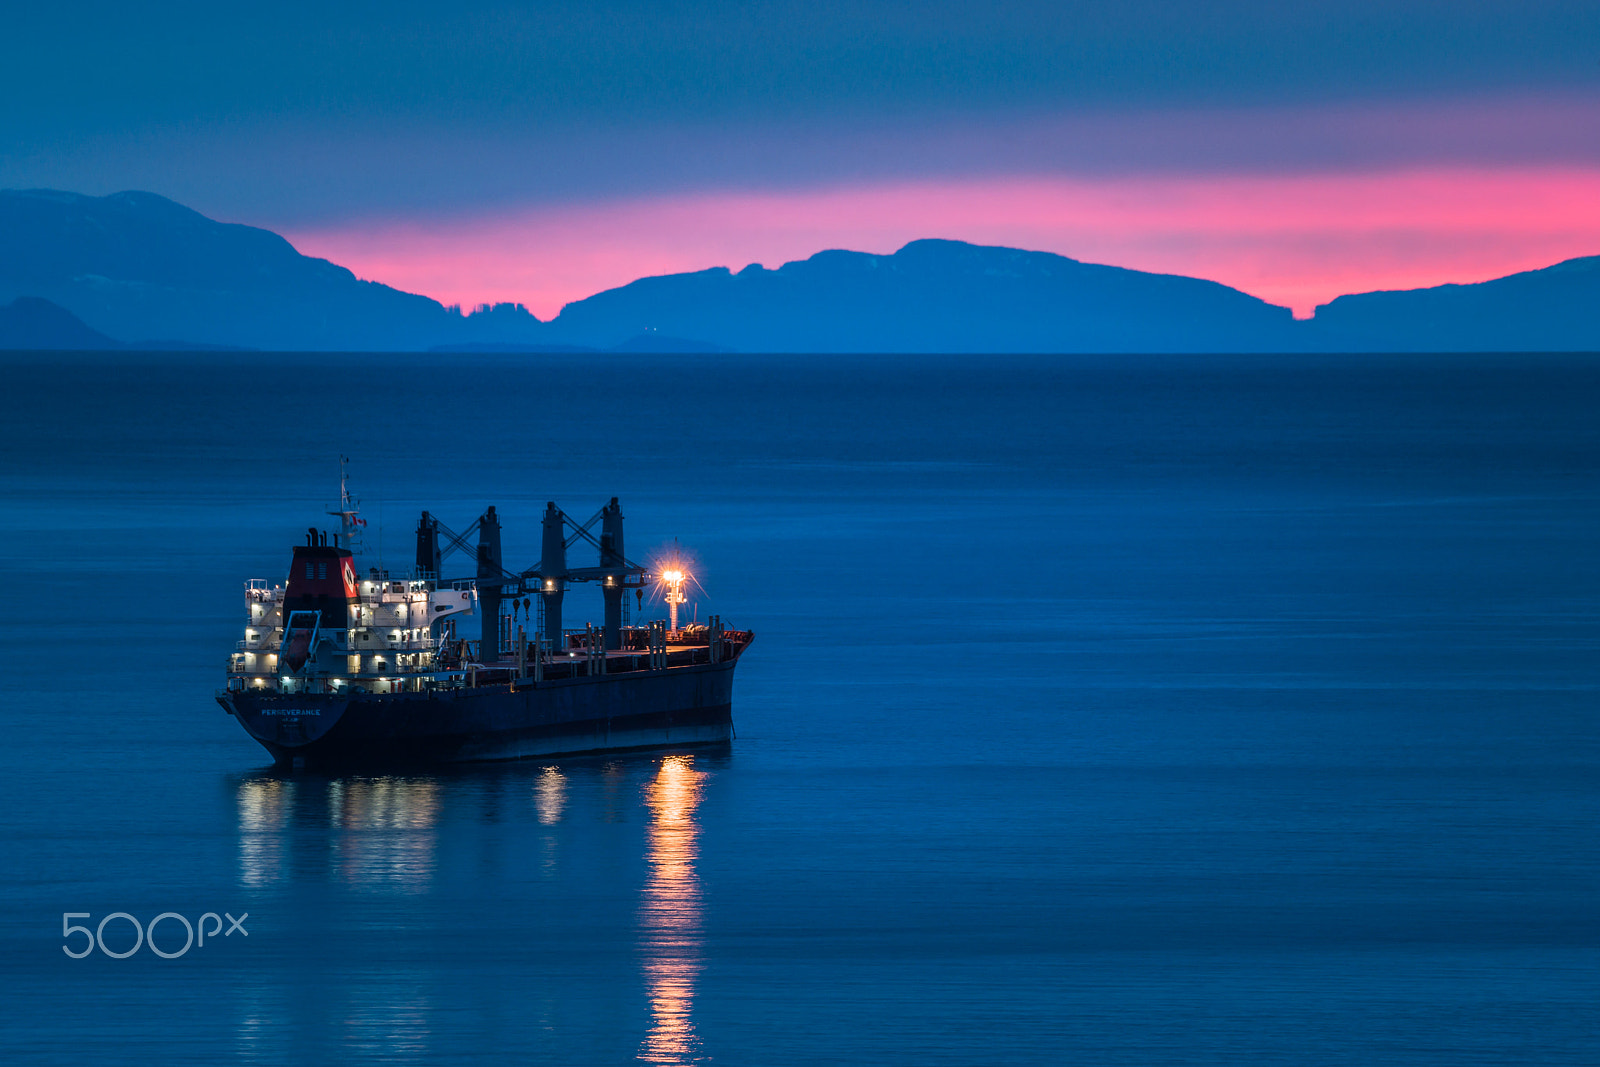 Sony a7R II sample photo. Oil tanker with sunset clouds backgrounds photography